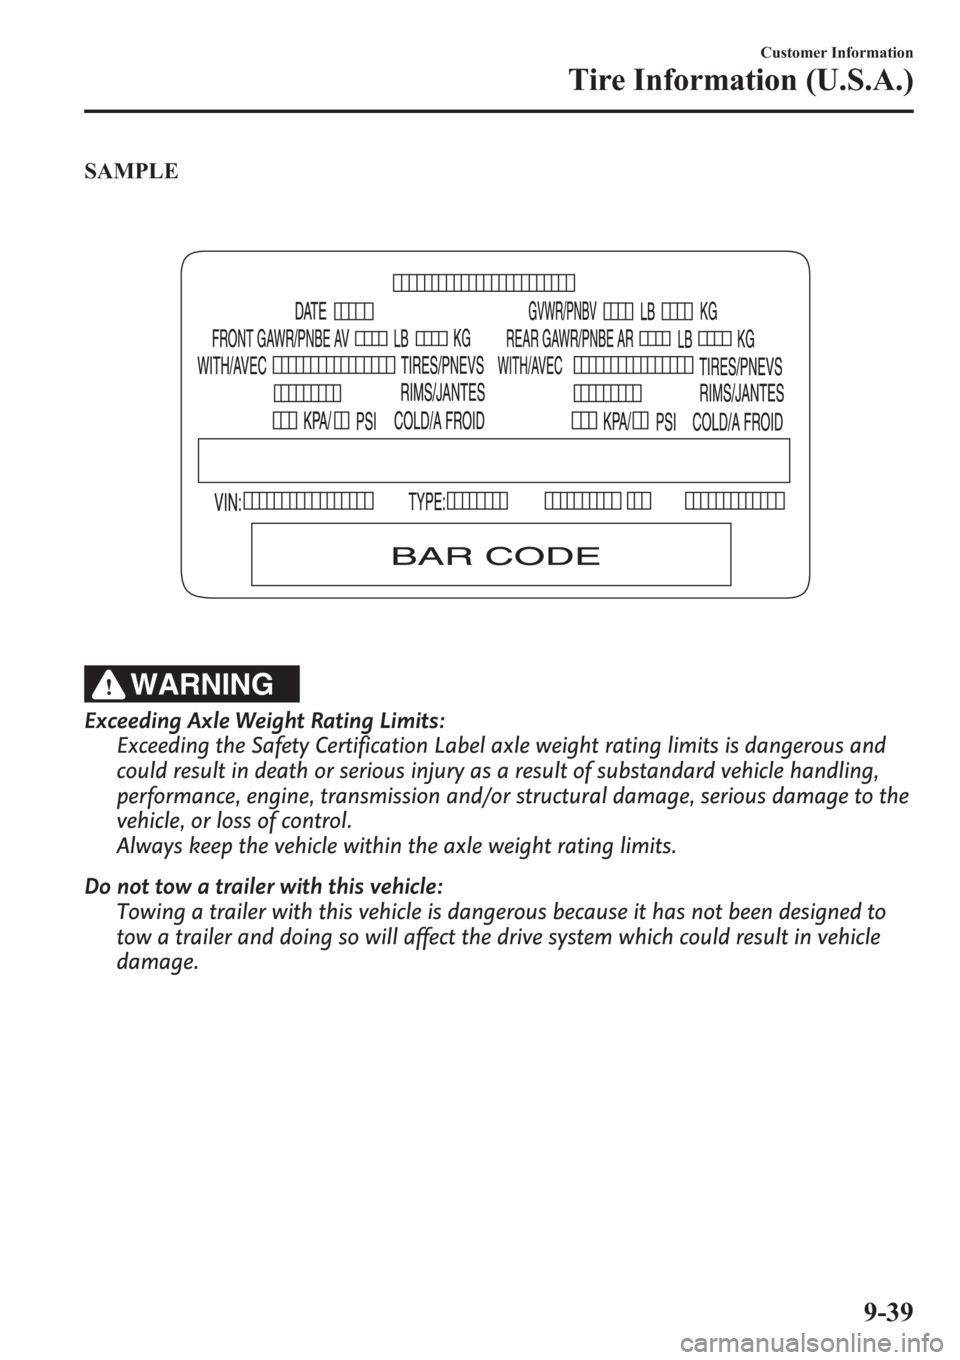 MAZDA MODEL 3 HATCHBACK 2013  Owners Manual (in English) SAMPLE
WARNING
Exceeding Axle Weight Rating Limits:
Exceeding the Safety Certification Label axle weight rating limits is dangerous and
could result in death or serious injury as a result of substanda